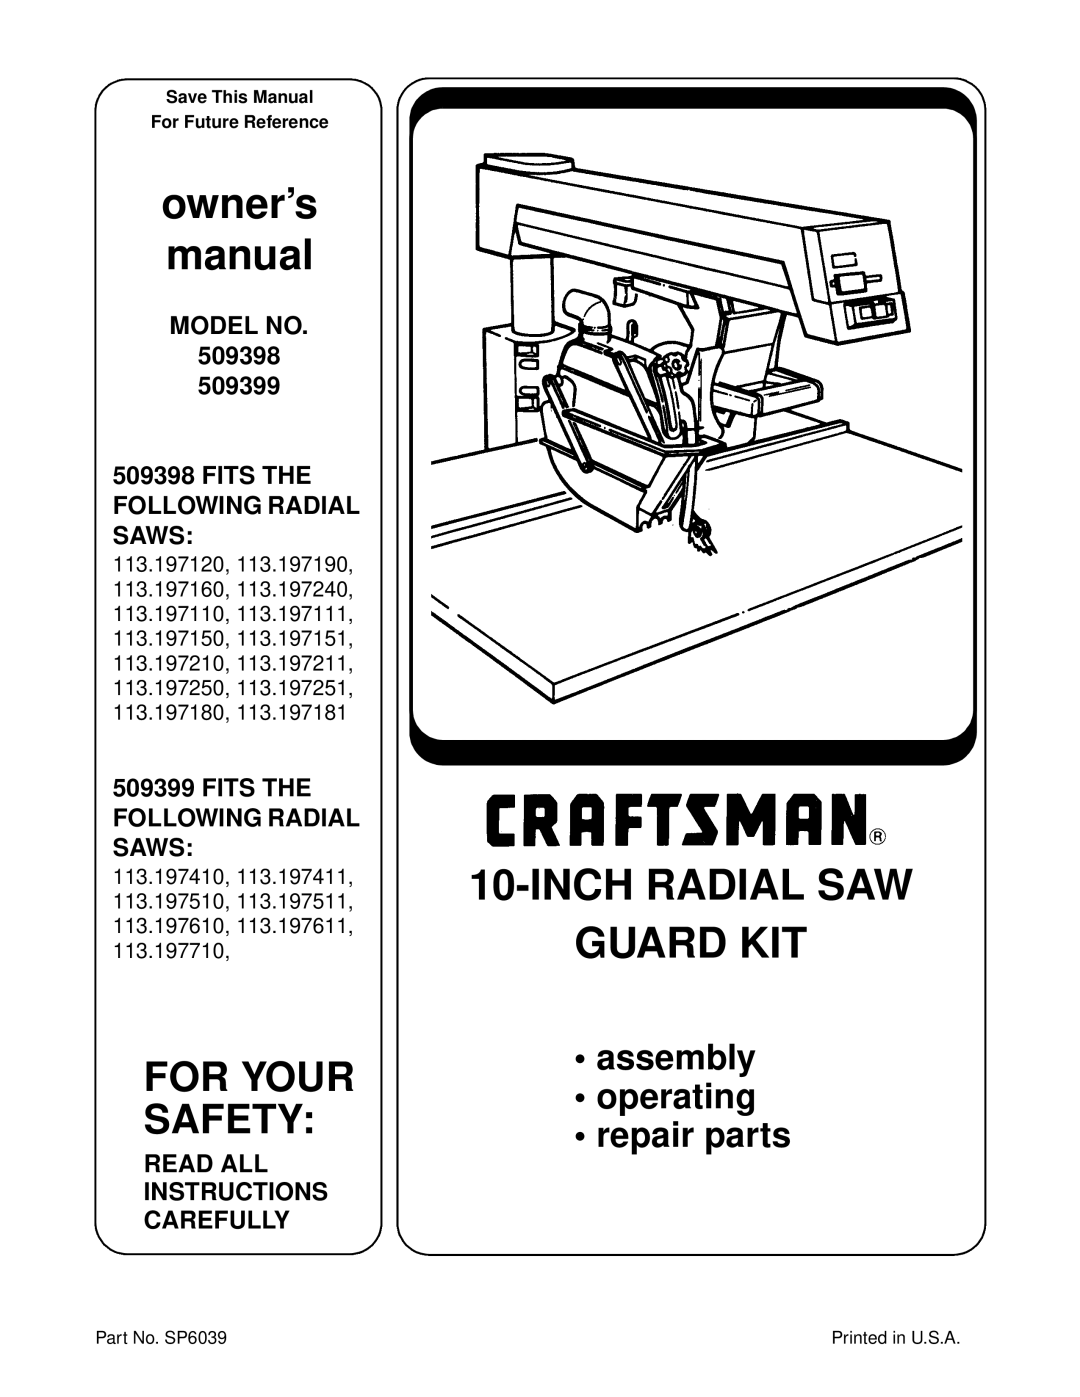 Craftsman owner manual Inch Radial Saw Guard Kit, MODEL NO 509398 509399 509398 FITS THE FOLLOWING RADIAL SAWS 